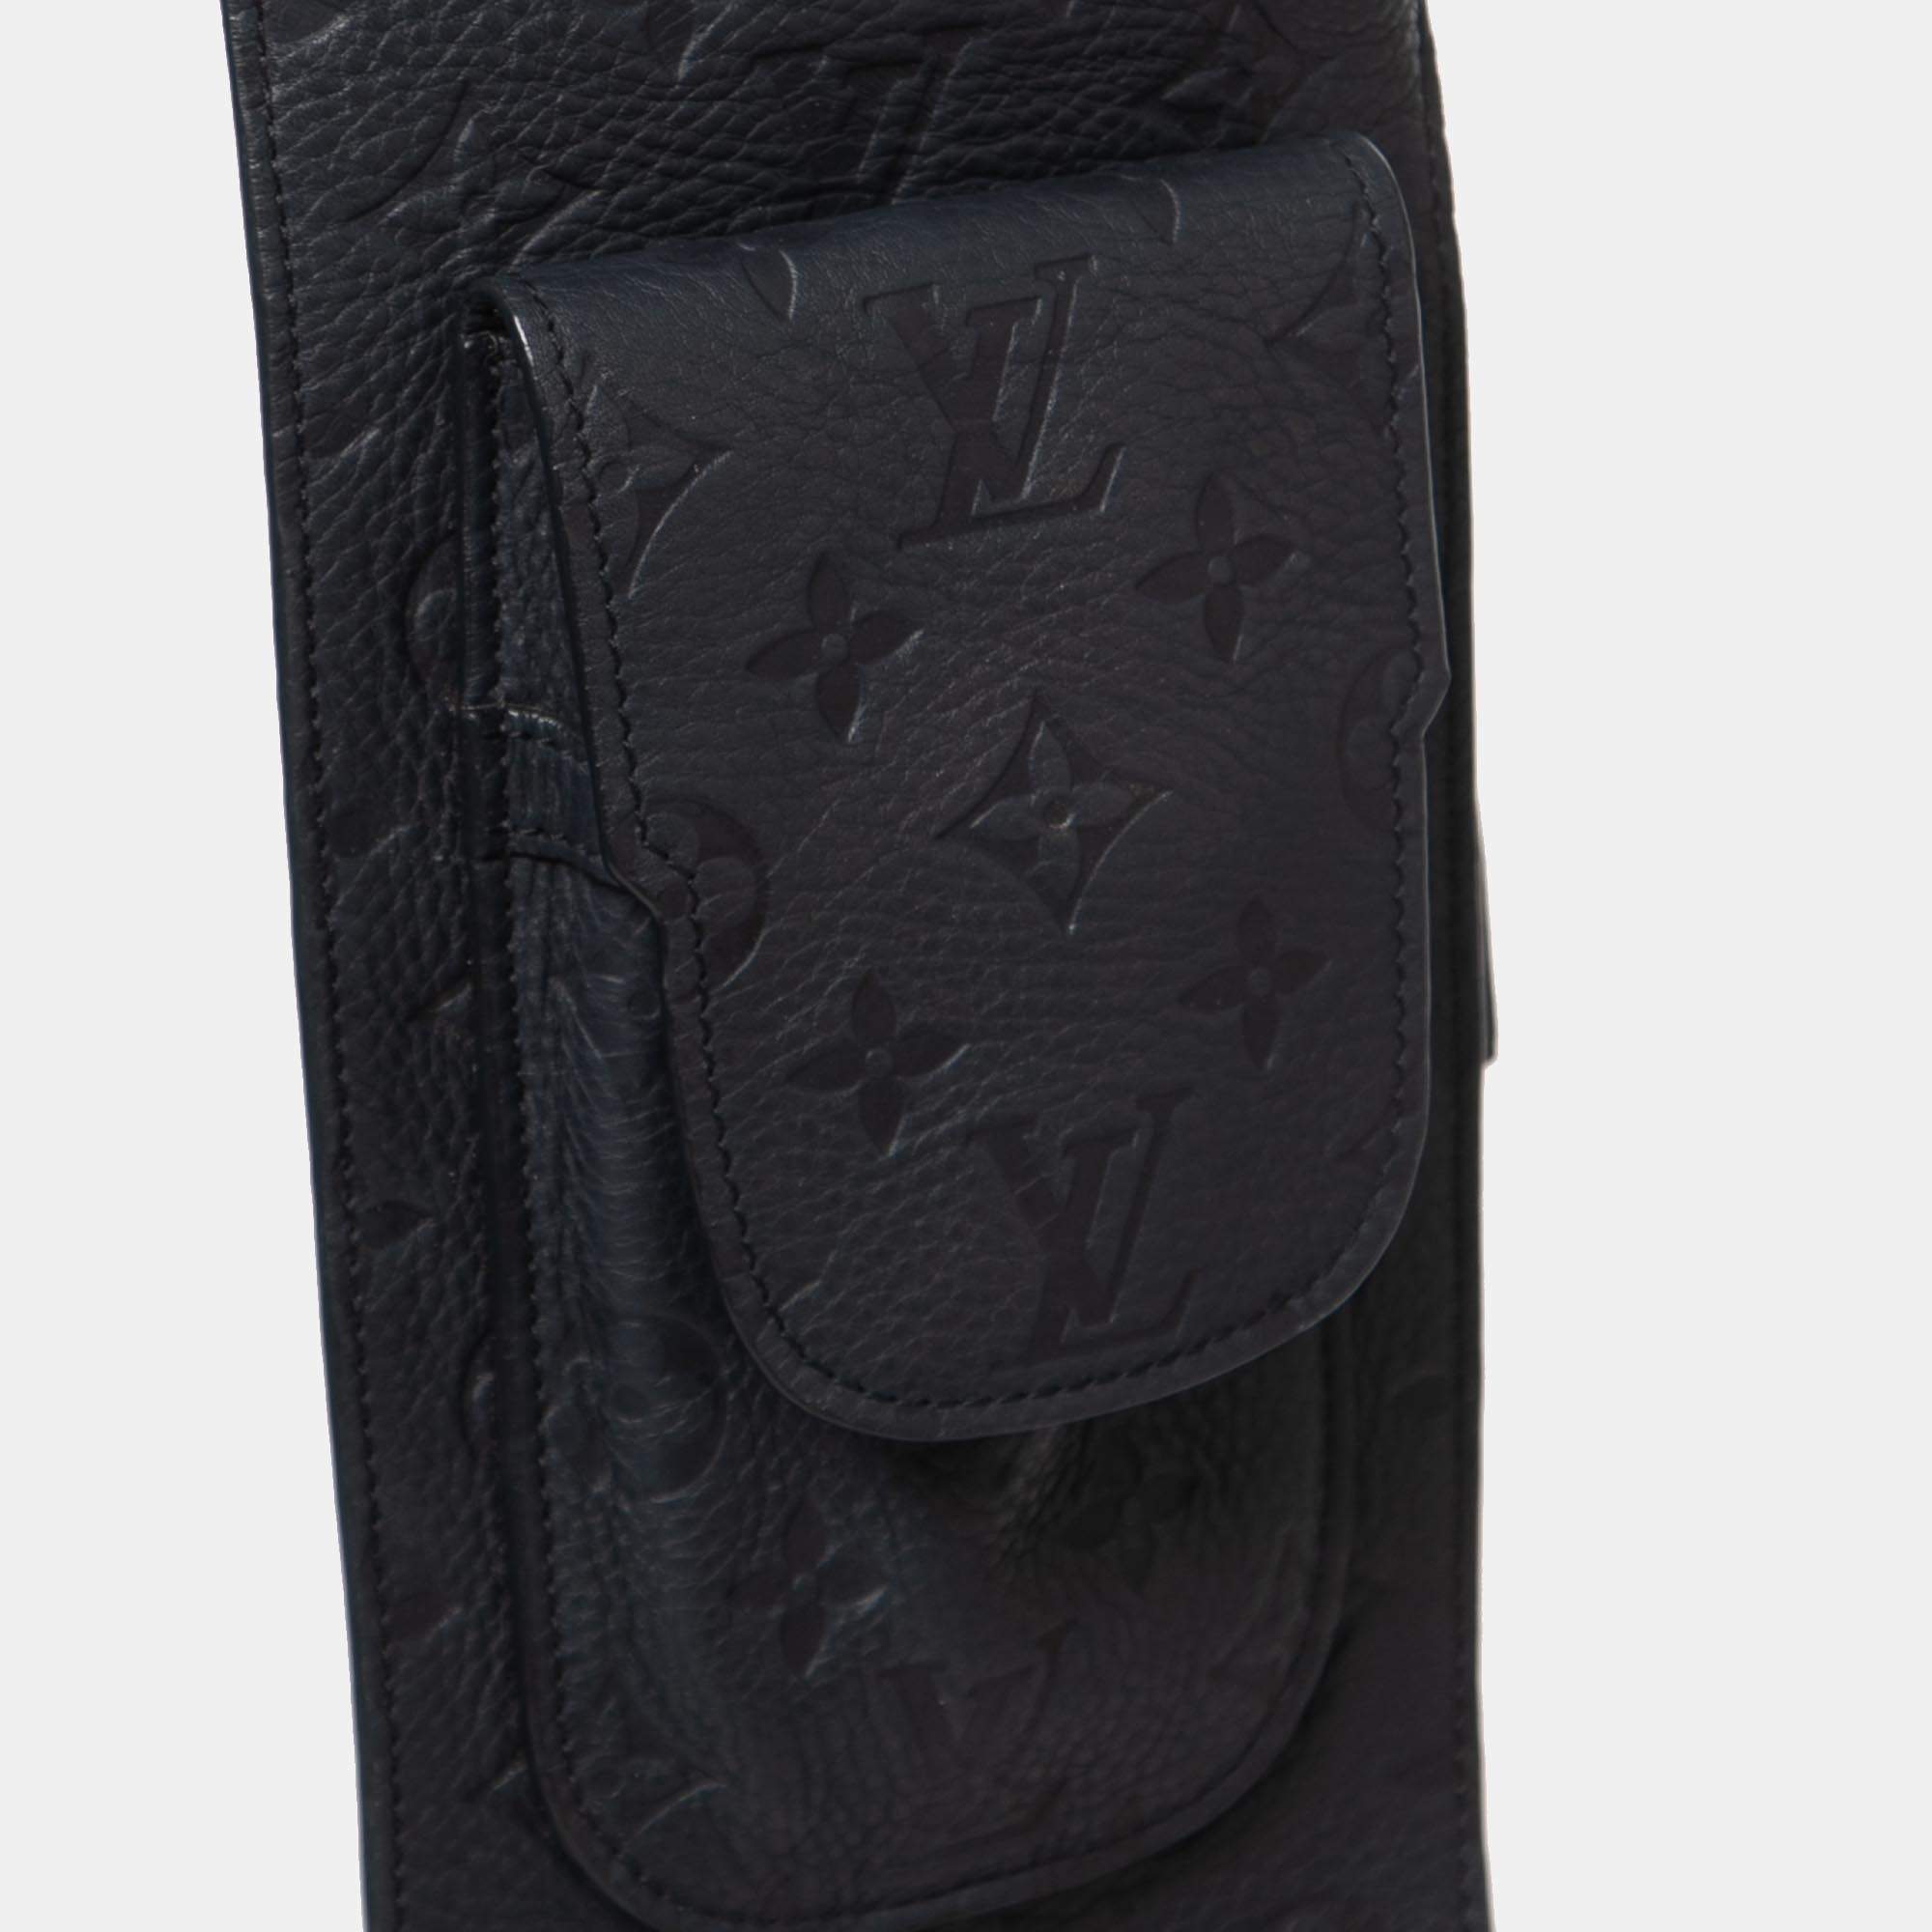 Louis Vuitton leather Pocket Monogram Embossed Mid Layer worn by